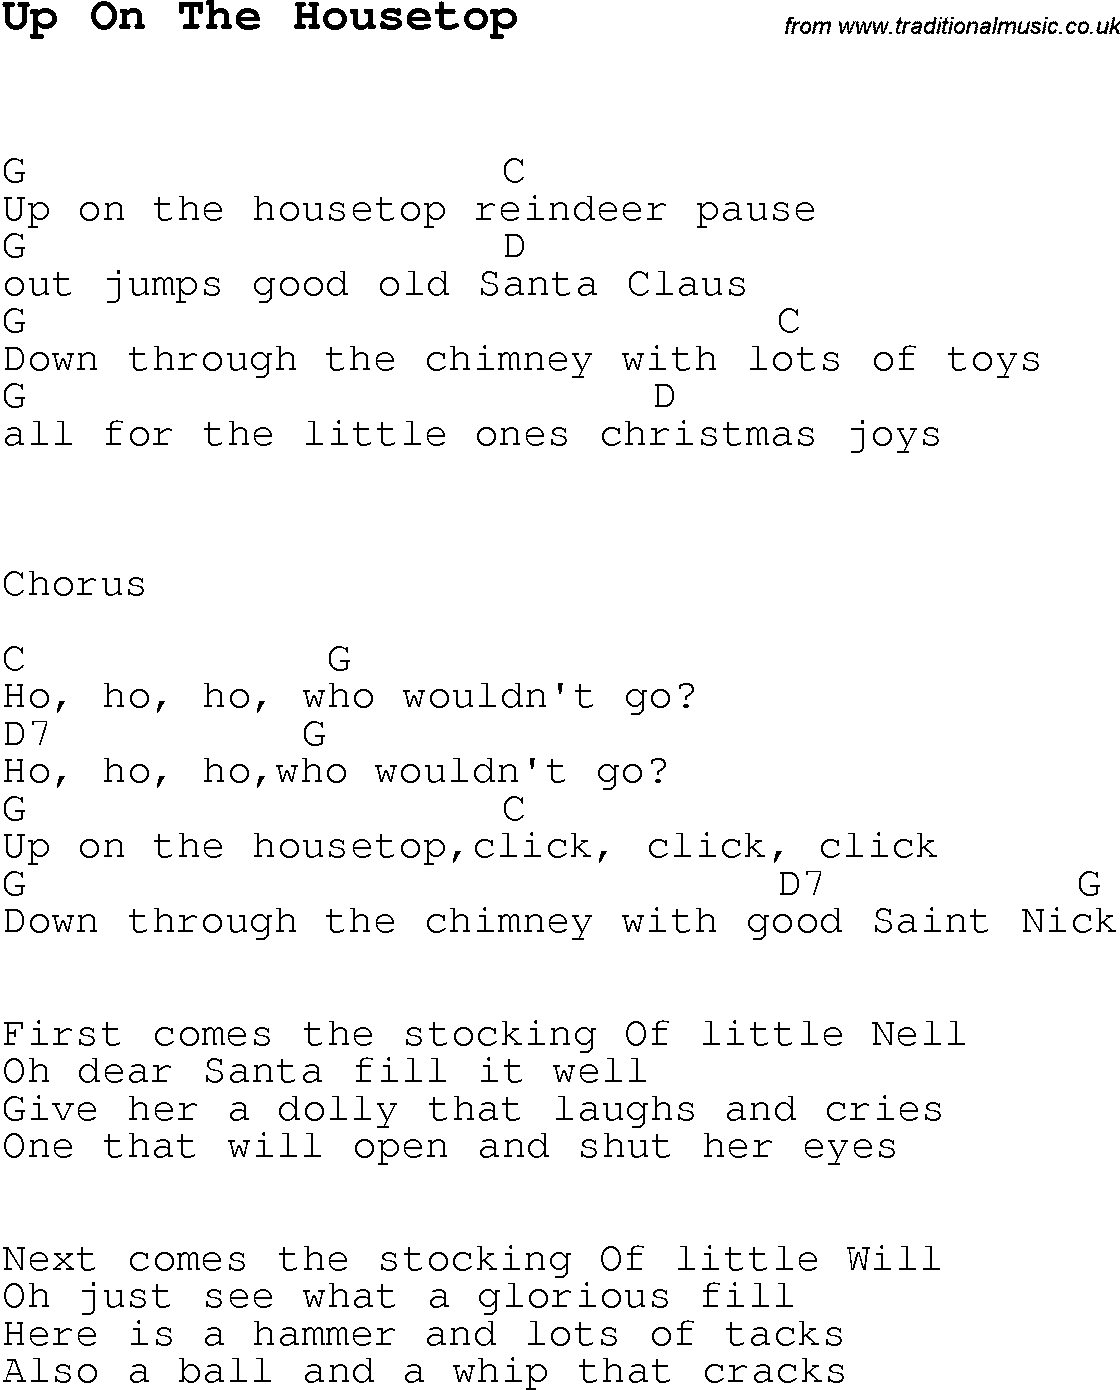 Christmas Carol/Song lyrics with chords for Up On The Housetop